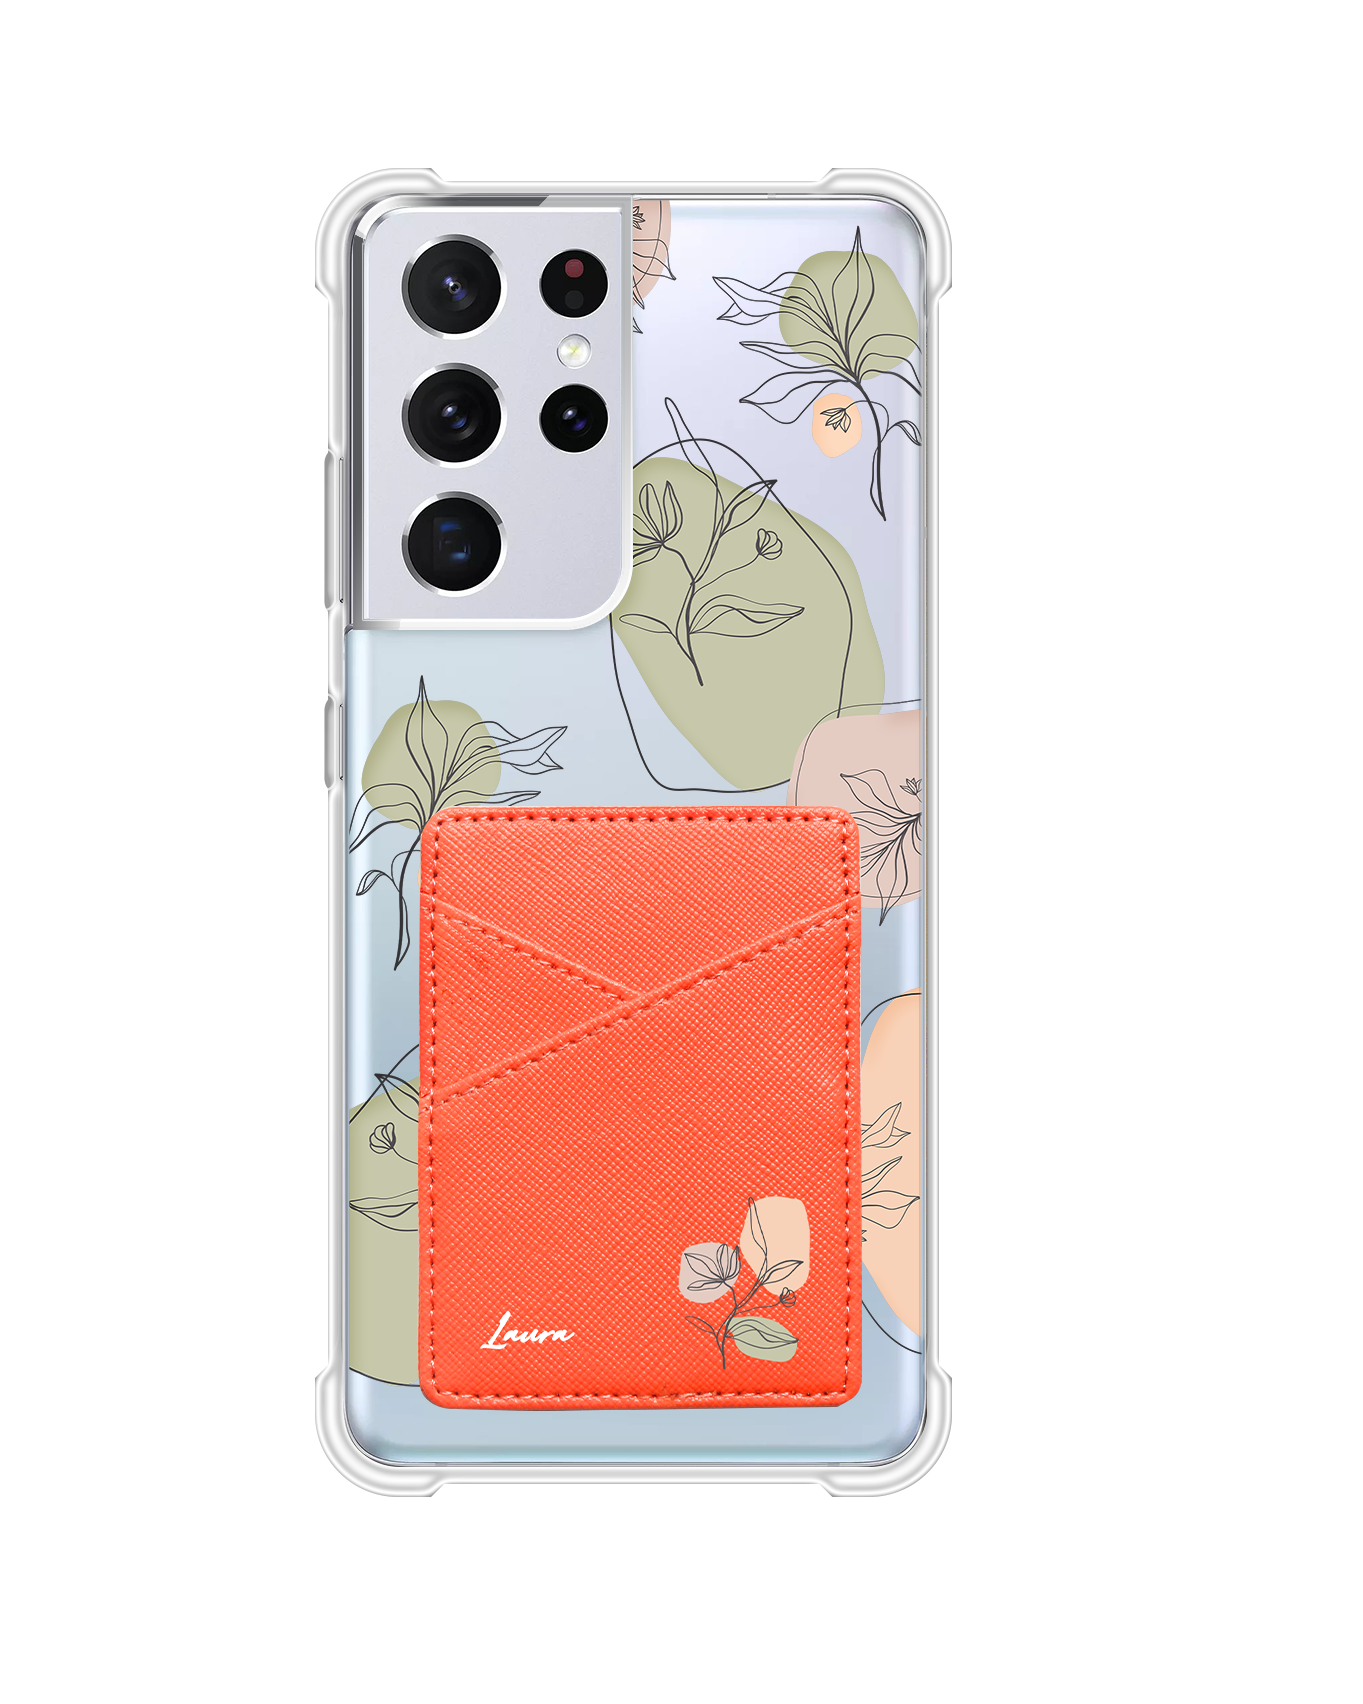 Android Phone Wallet Case - Sketchy Flower 2.0